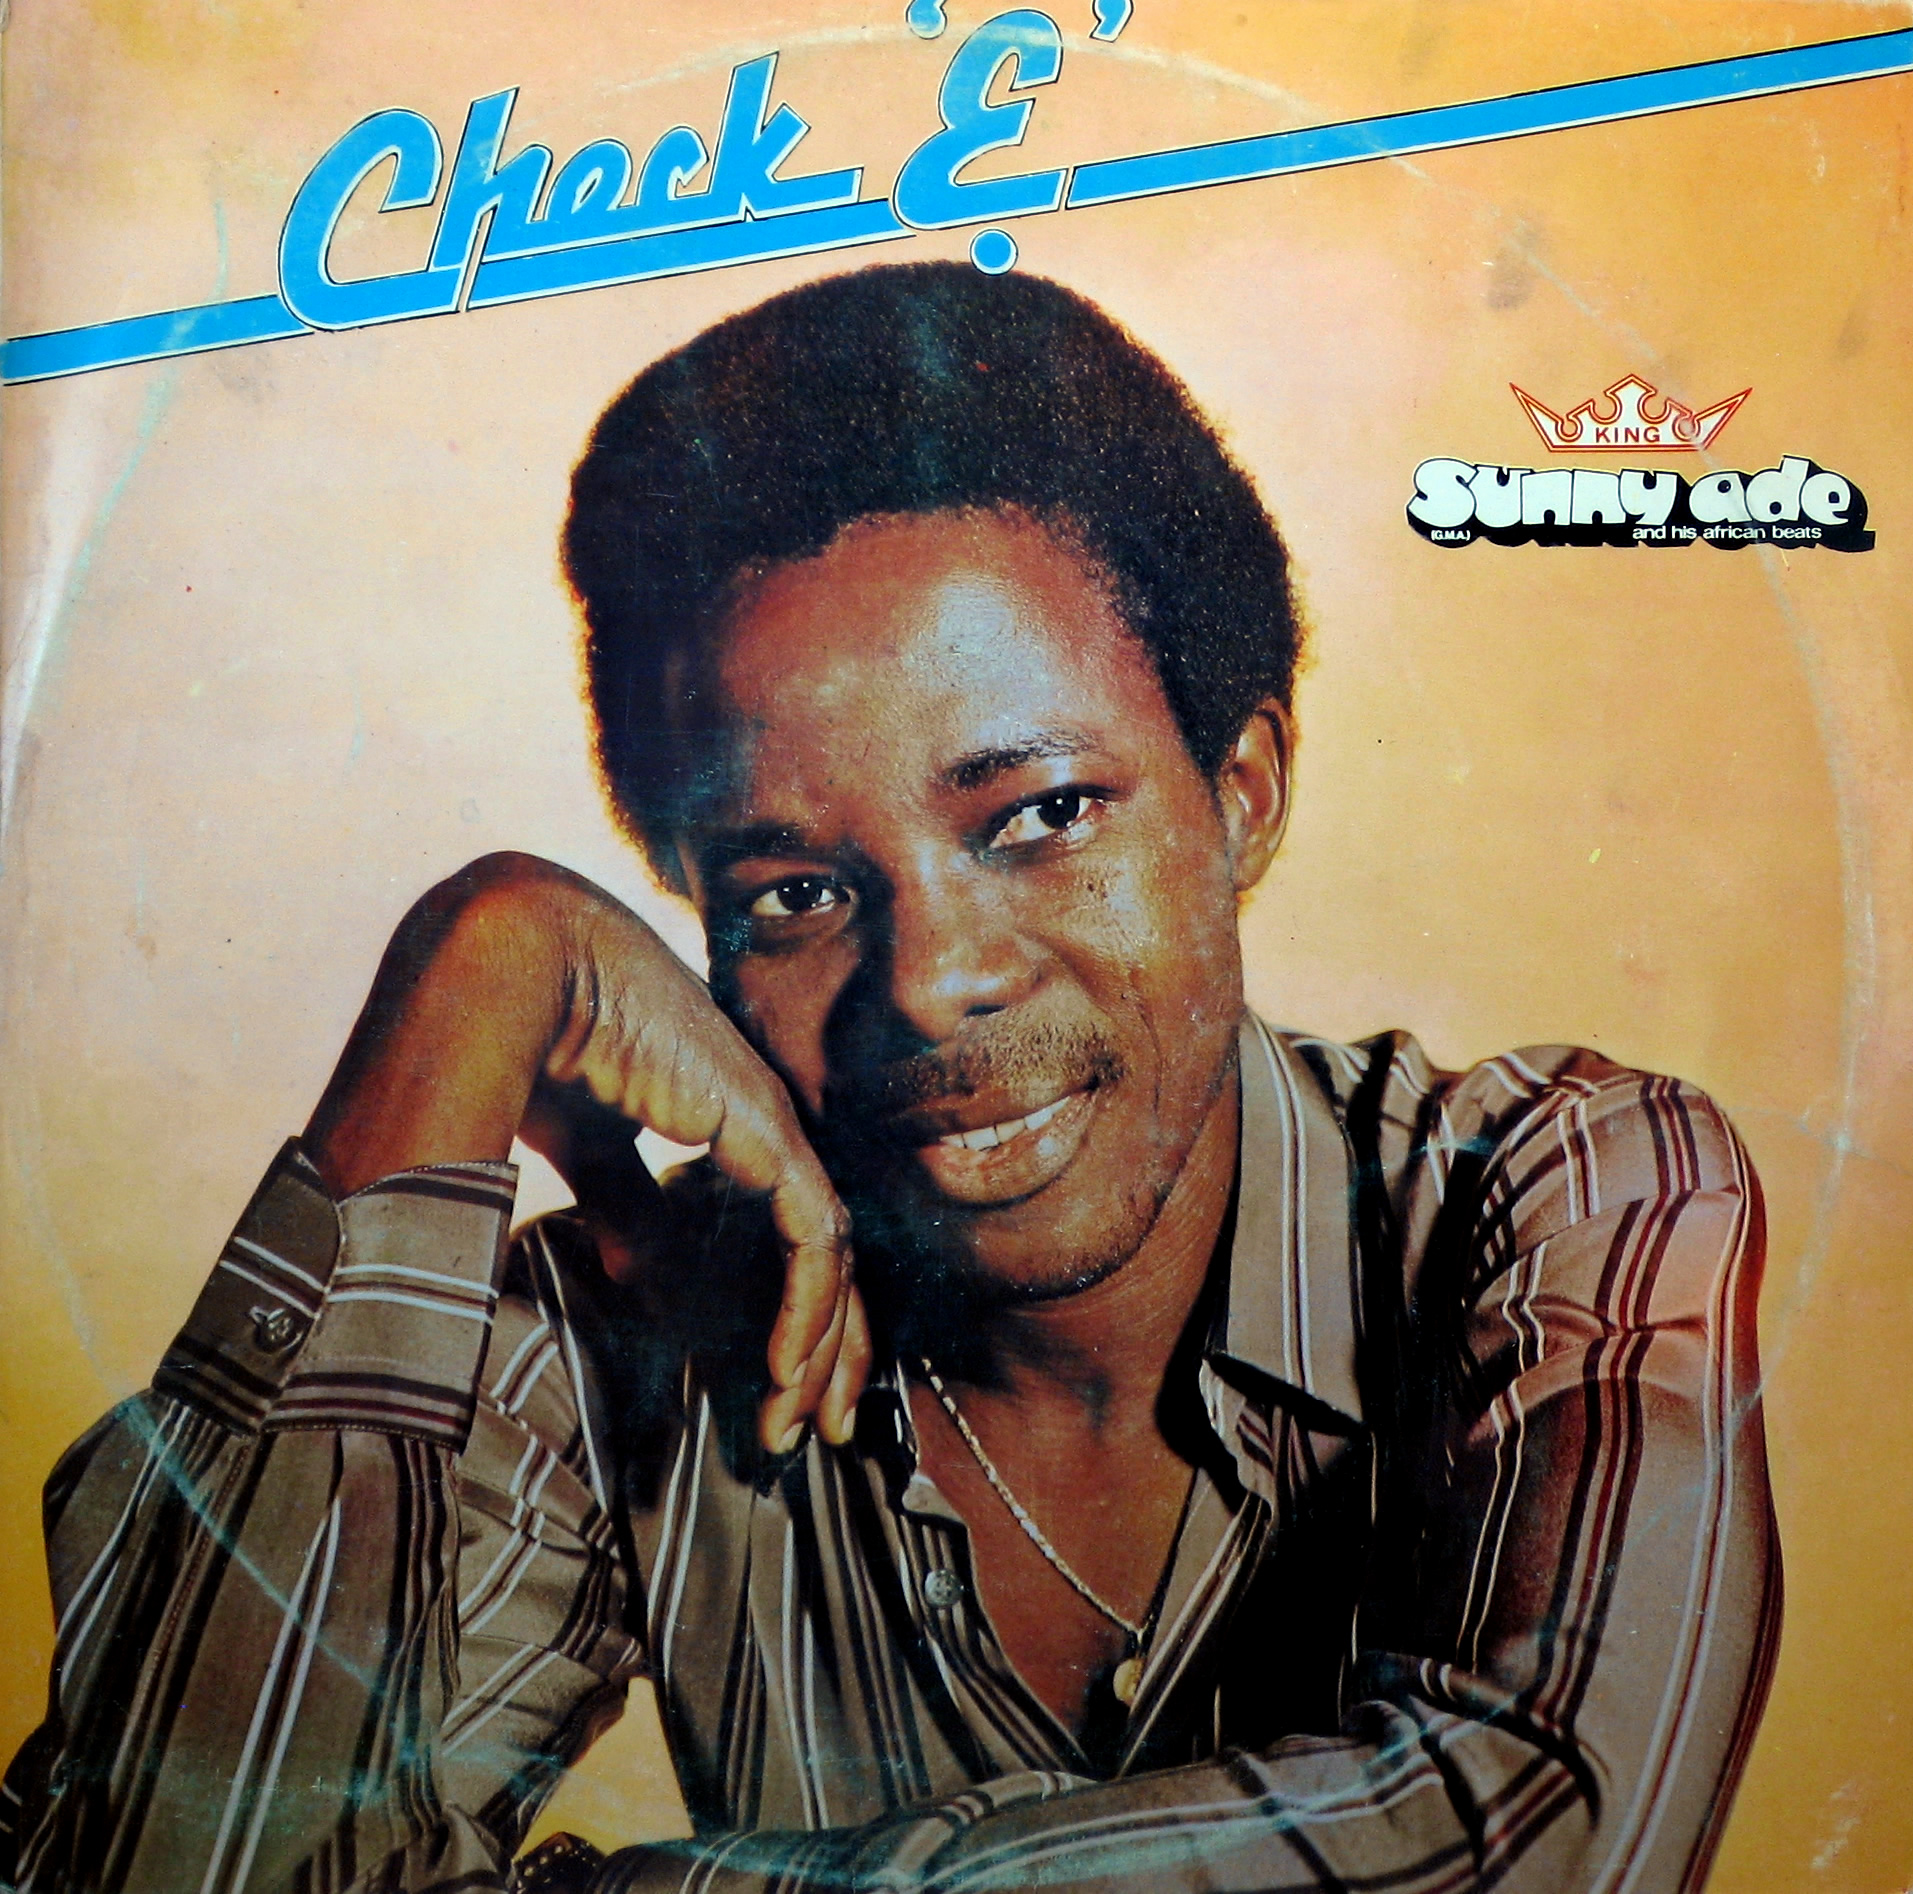 King Sunny Ade and his African Beats – Check ‘E’, Sunny Alade Records Ltd. 1981 King-Sunny-Ade-front